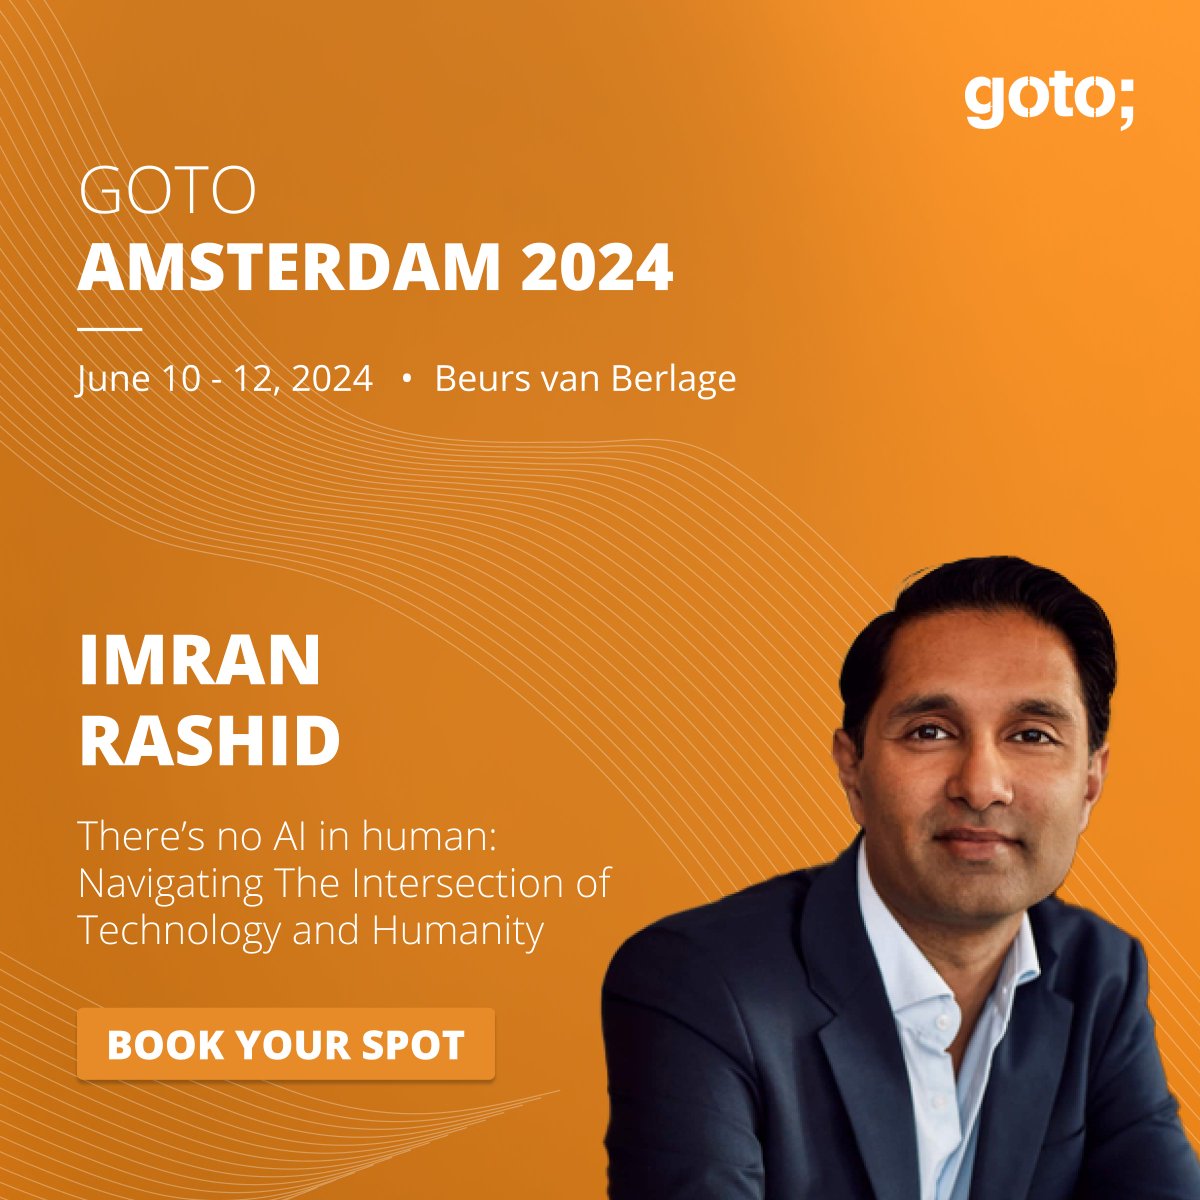 We welcome @DrImranRashid, director of Health Innovation at @LenusHSE, as a keynote speaker! His talk, 'There’s no AI in human: Navigating The Intersection of Technology and Humanity,' explores digitalisation's impact on our well-being. 👉gotoams.nl/2024/speakers/…